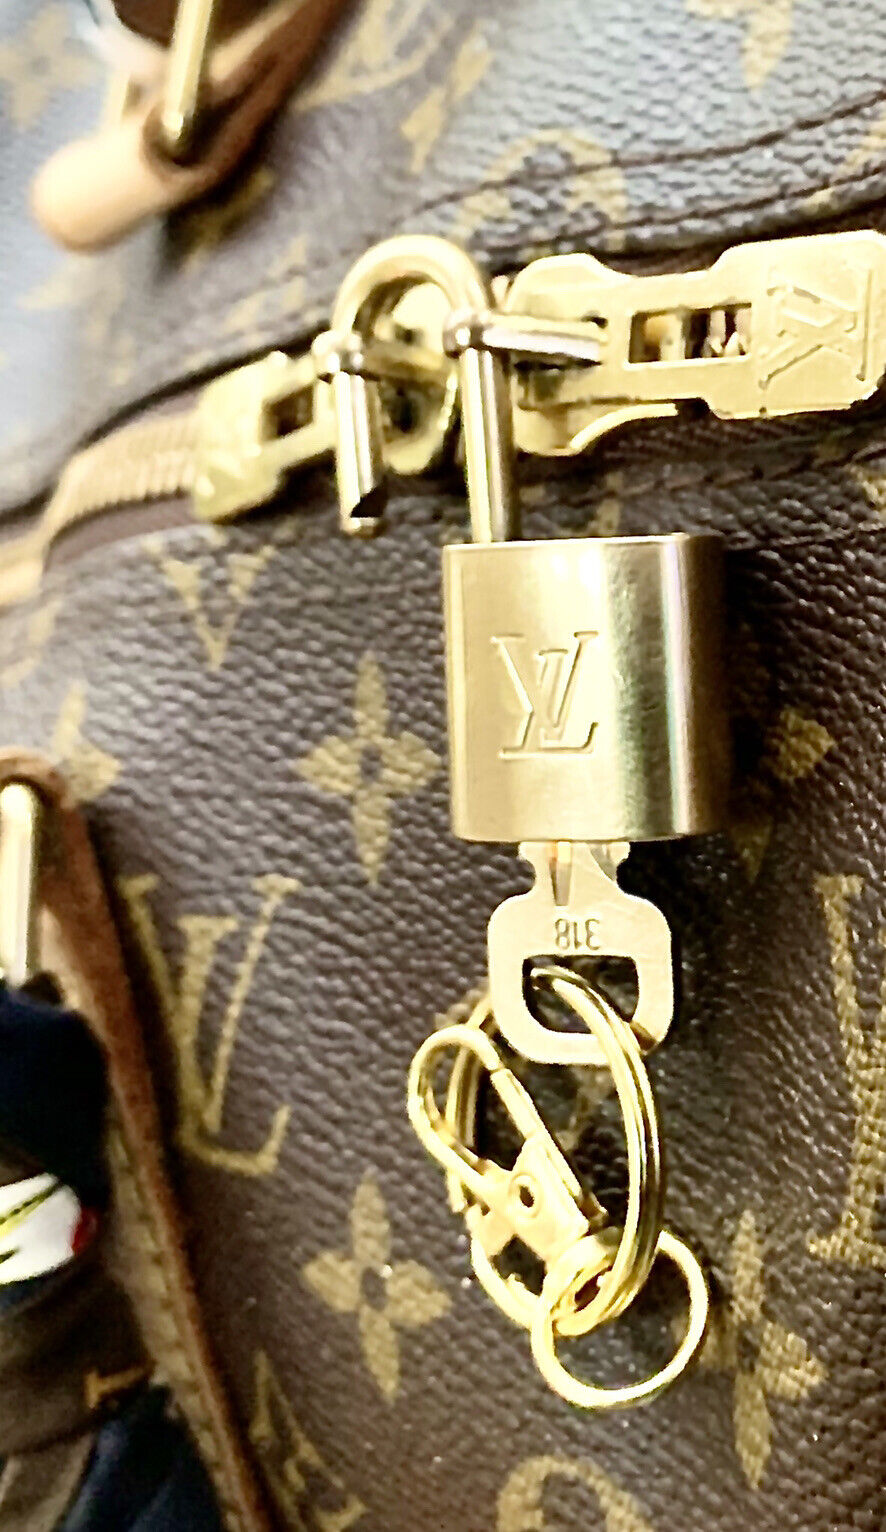 New Louis Vuitton Metal Gold Lock With Key For Handmade Bag